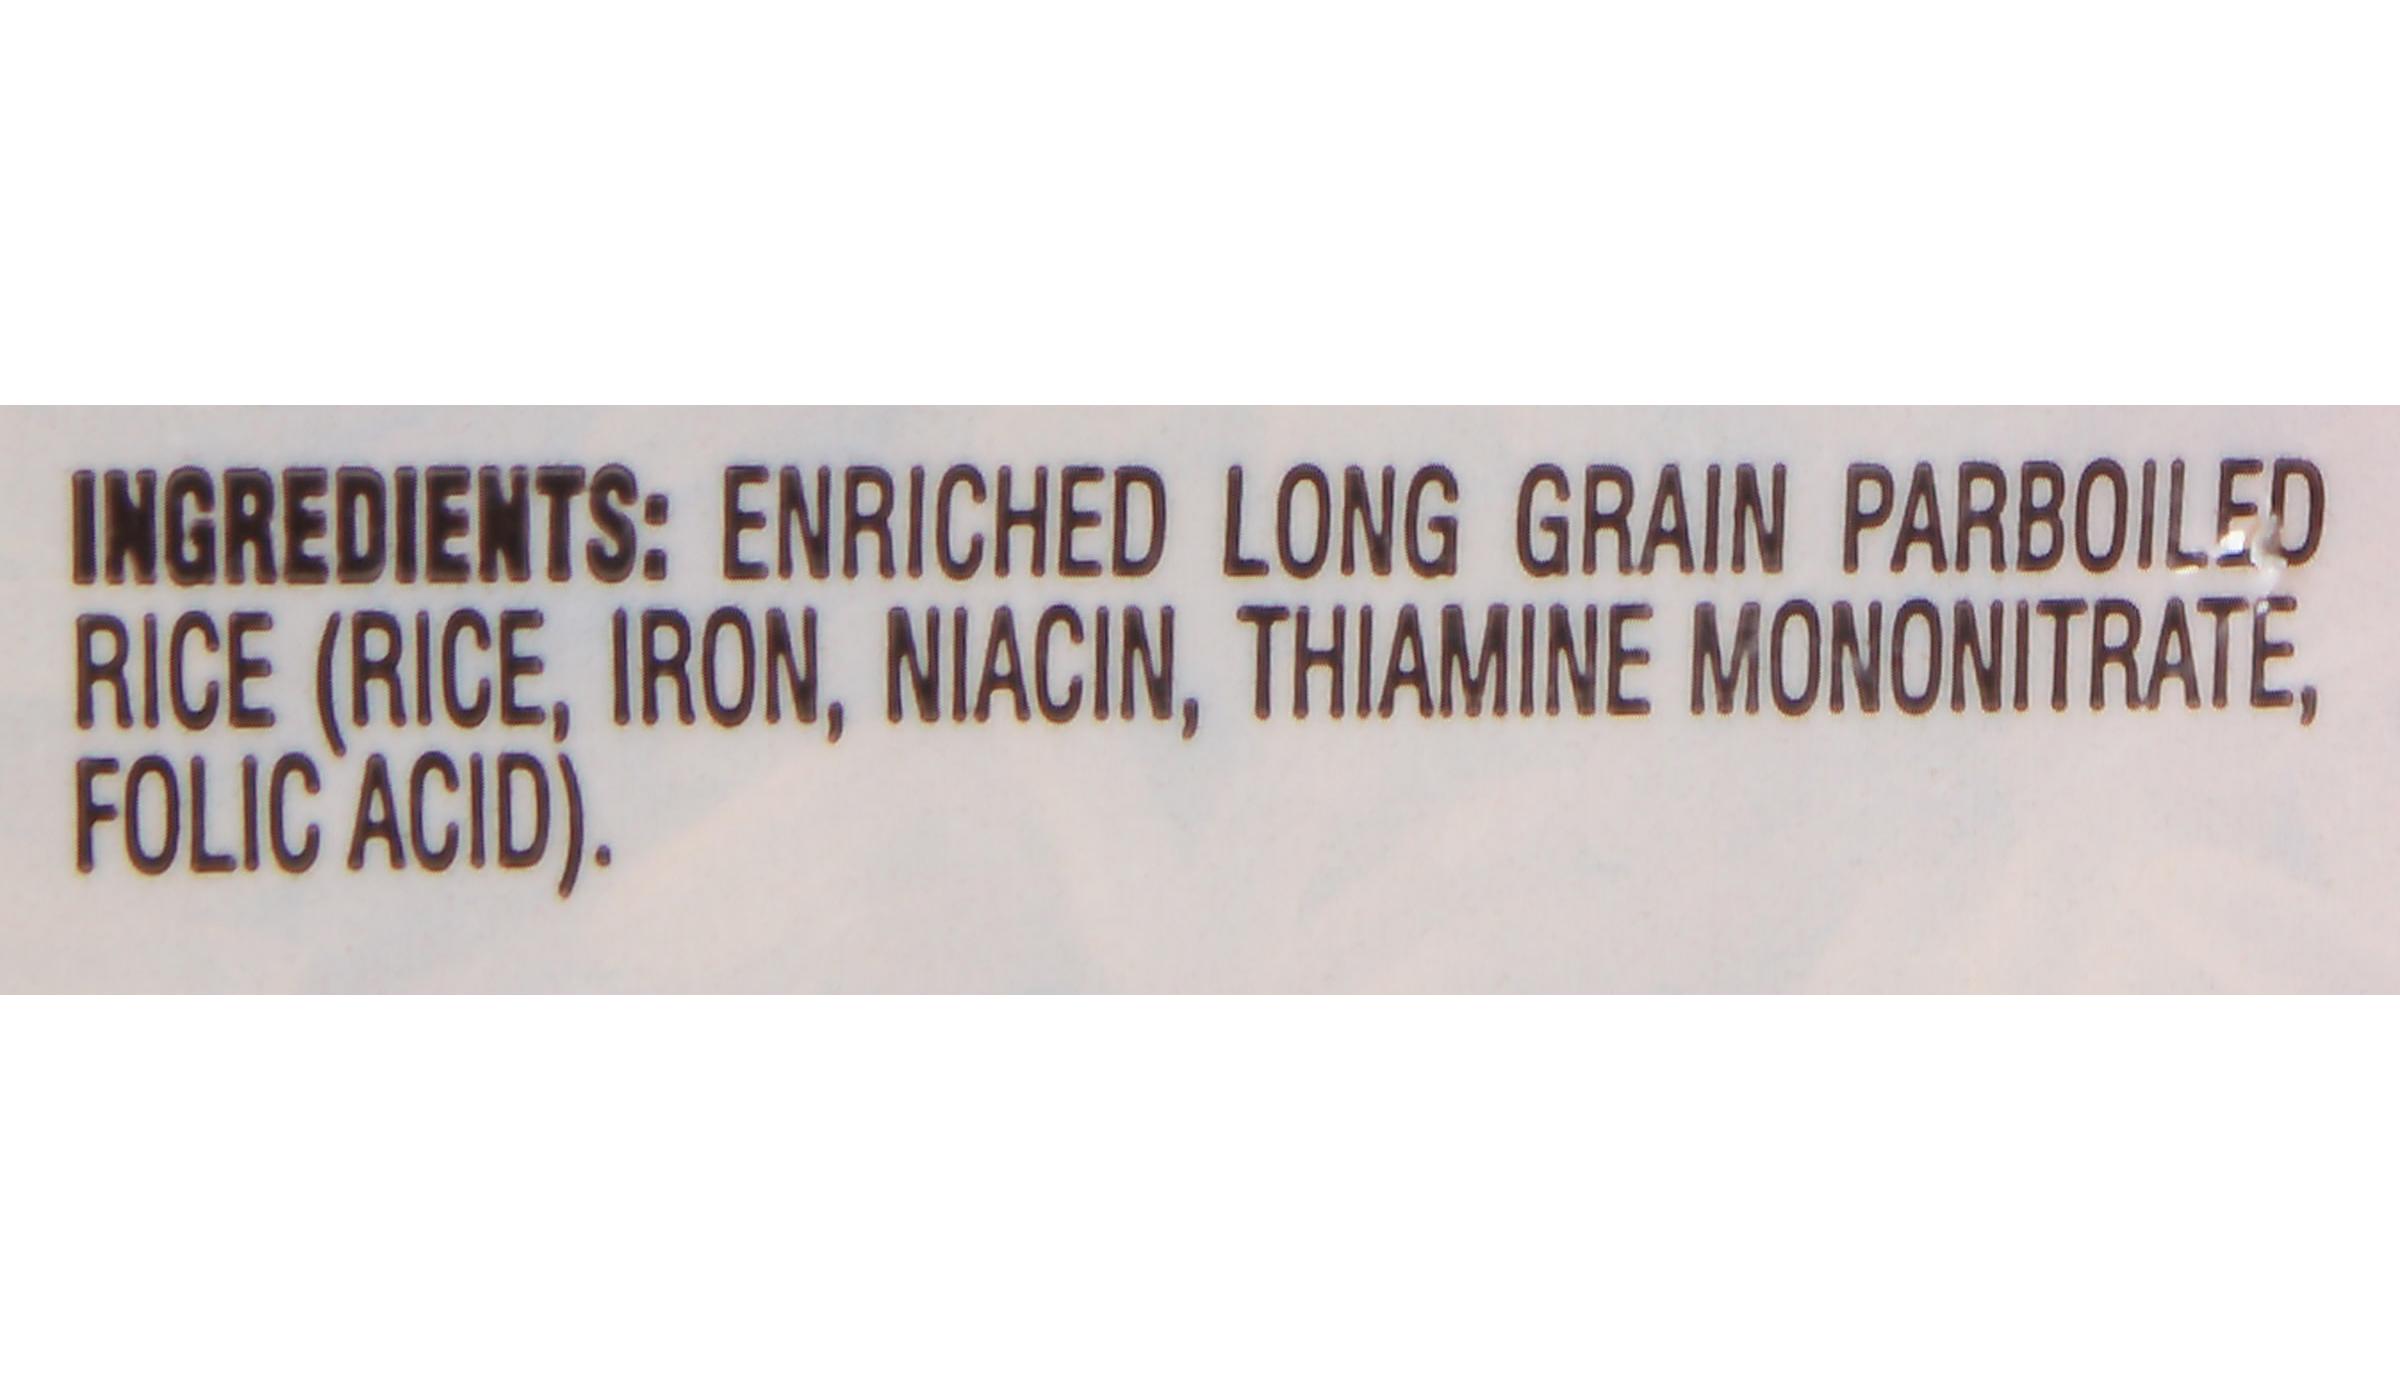 Zatarain's Enriched Parboiled Long Grain Rice; image 4 of 8